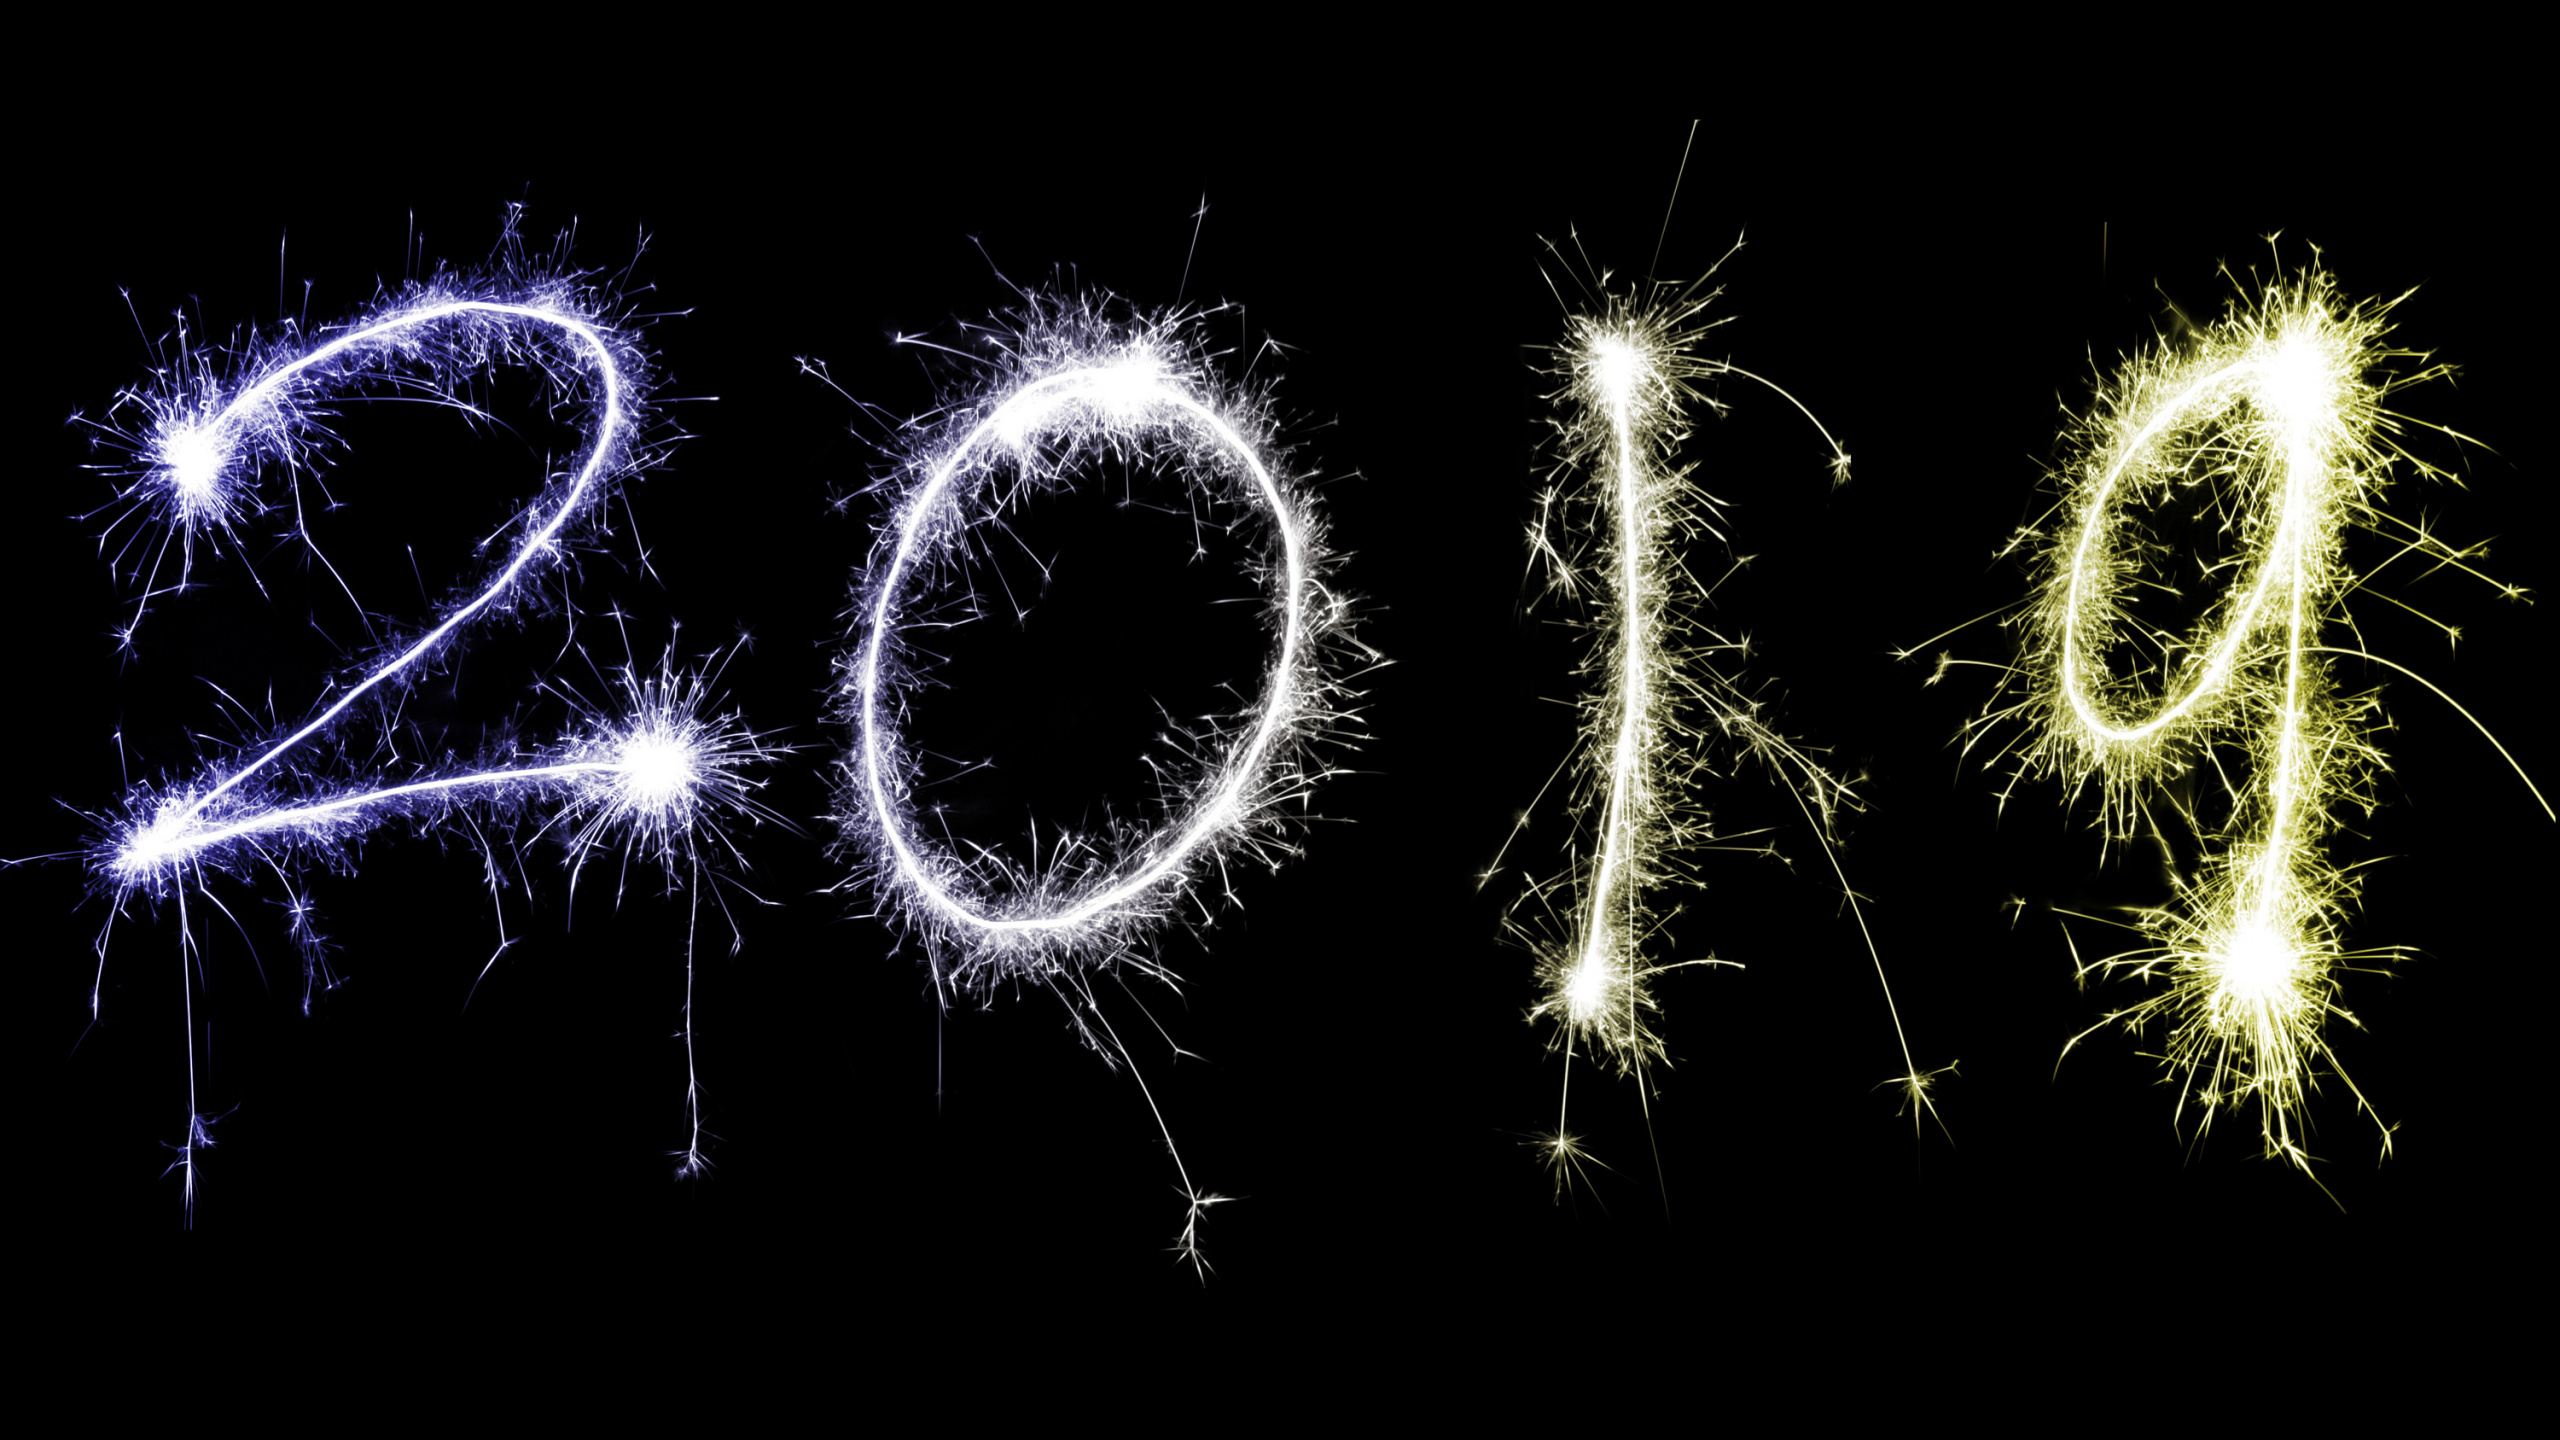 New Years Eve, New Year, Fireworks, Sparkler, Darkness. Wallpaper in 2560x1440 Resolution